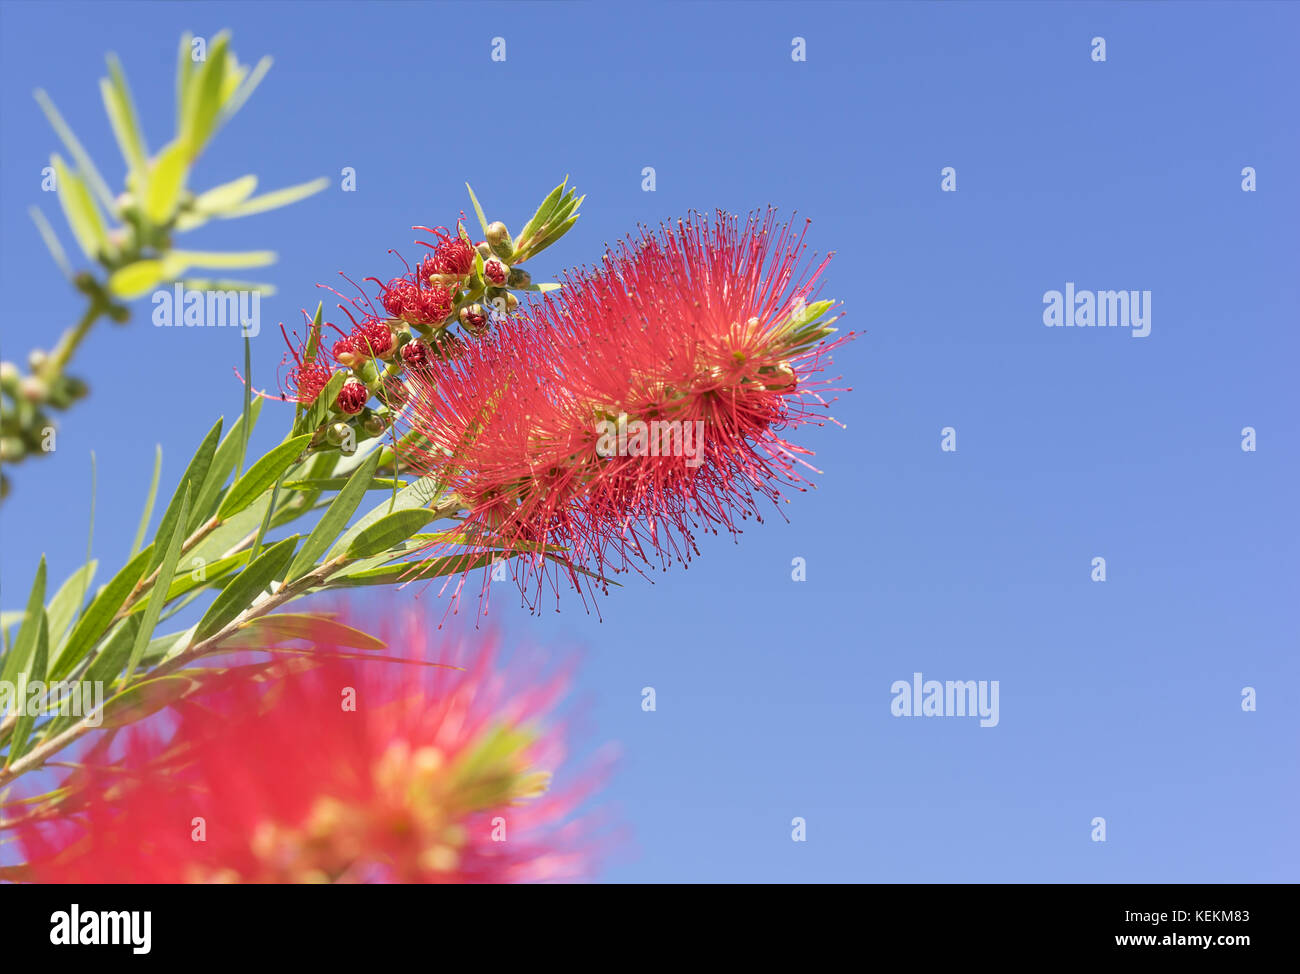 Vivid colors of Australian Callistemon red bottlebrush flowers and flower buds against clear blue sky on a bright sunny Spring day Stock Photo